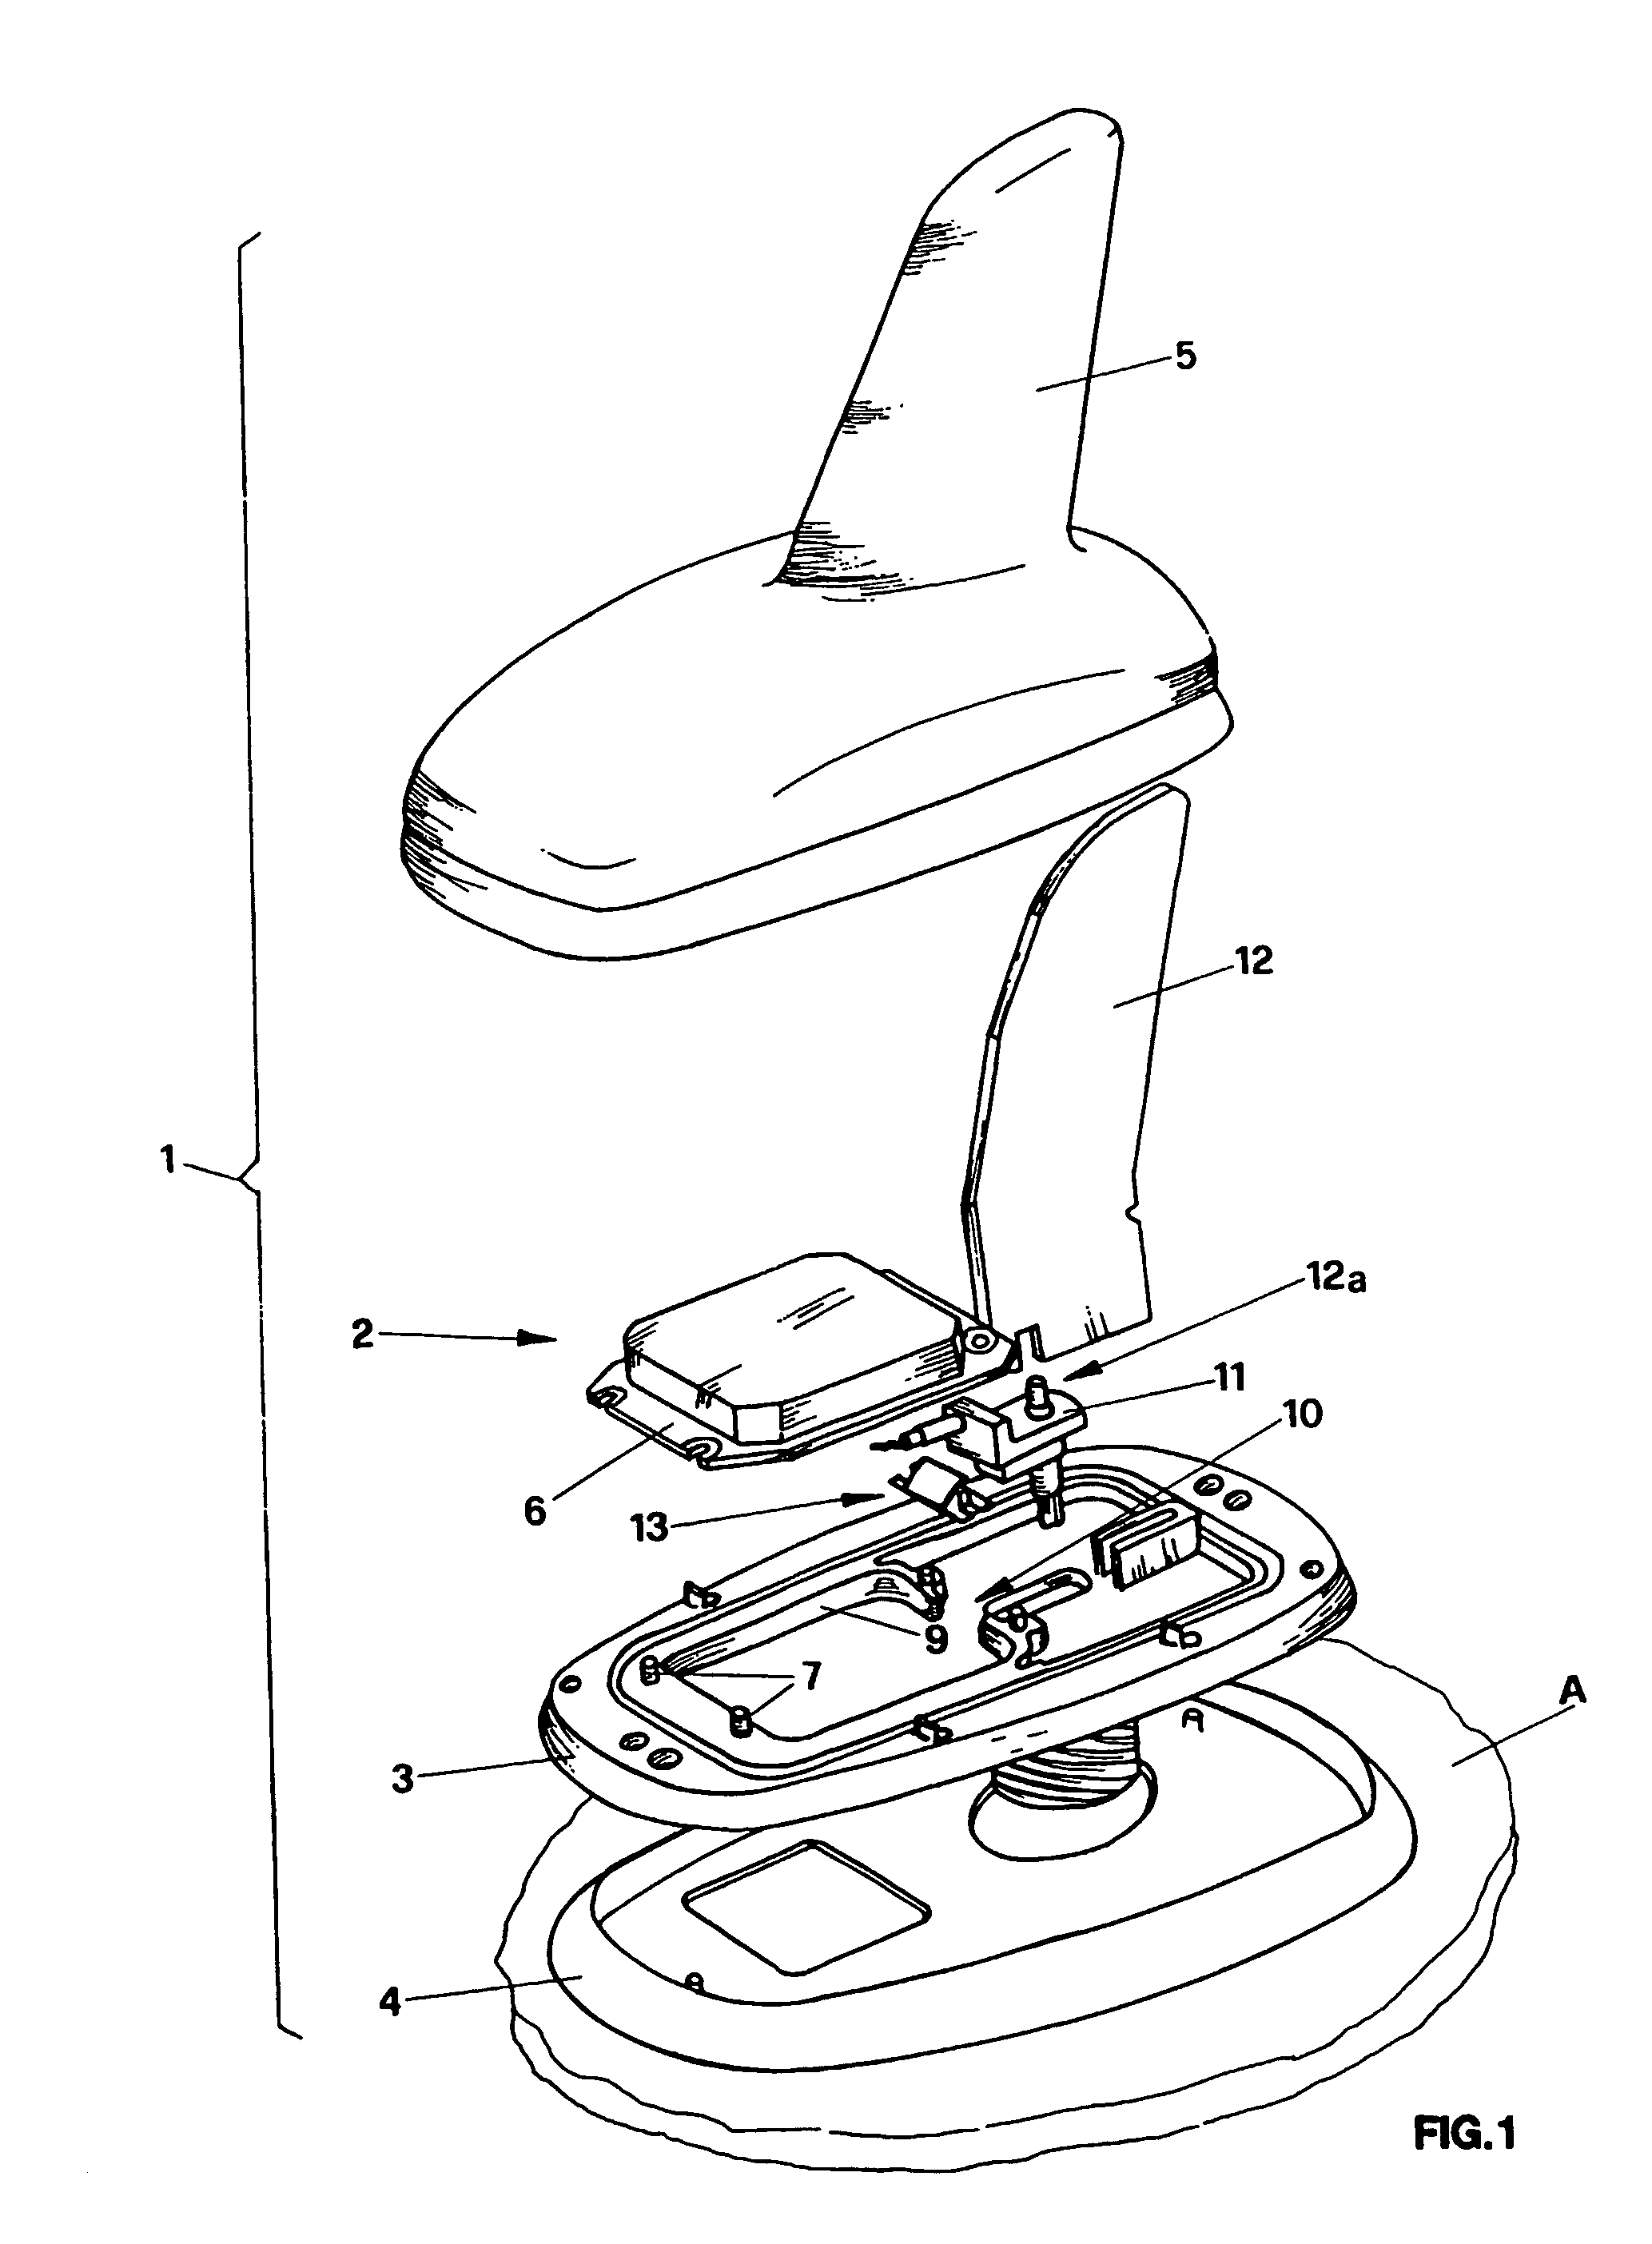 Vehicular antenna with improved screening